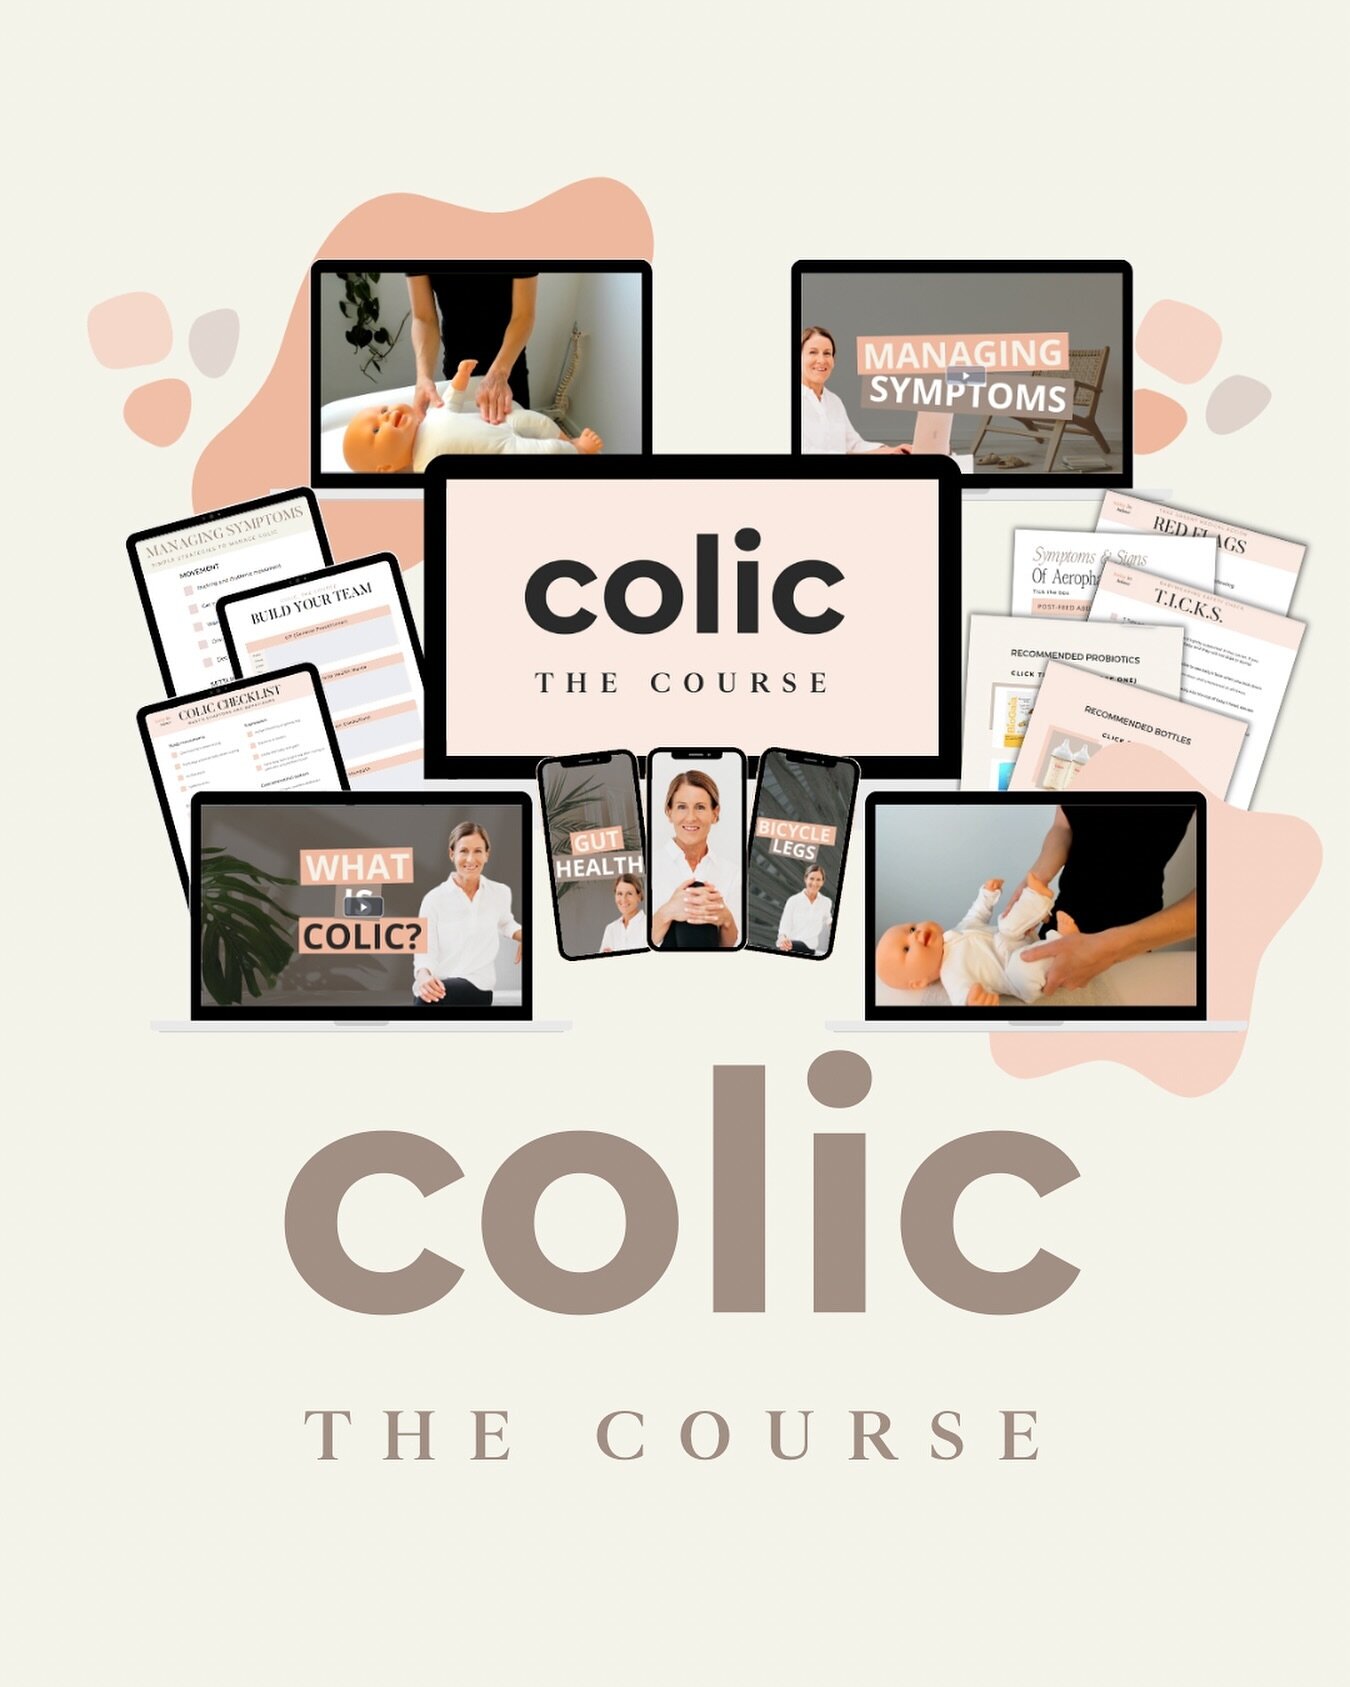 As an osteopath with over 20 years experience, I regularly treat babies with colic symptoms.
&nbsp;
I understand how stressful it can be for parents when they don&rsquo;t know&nbsp;how&nbsp;to relieve their baby&rsquo;s symptoms 😫
&nbsp;
When it com